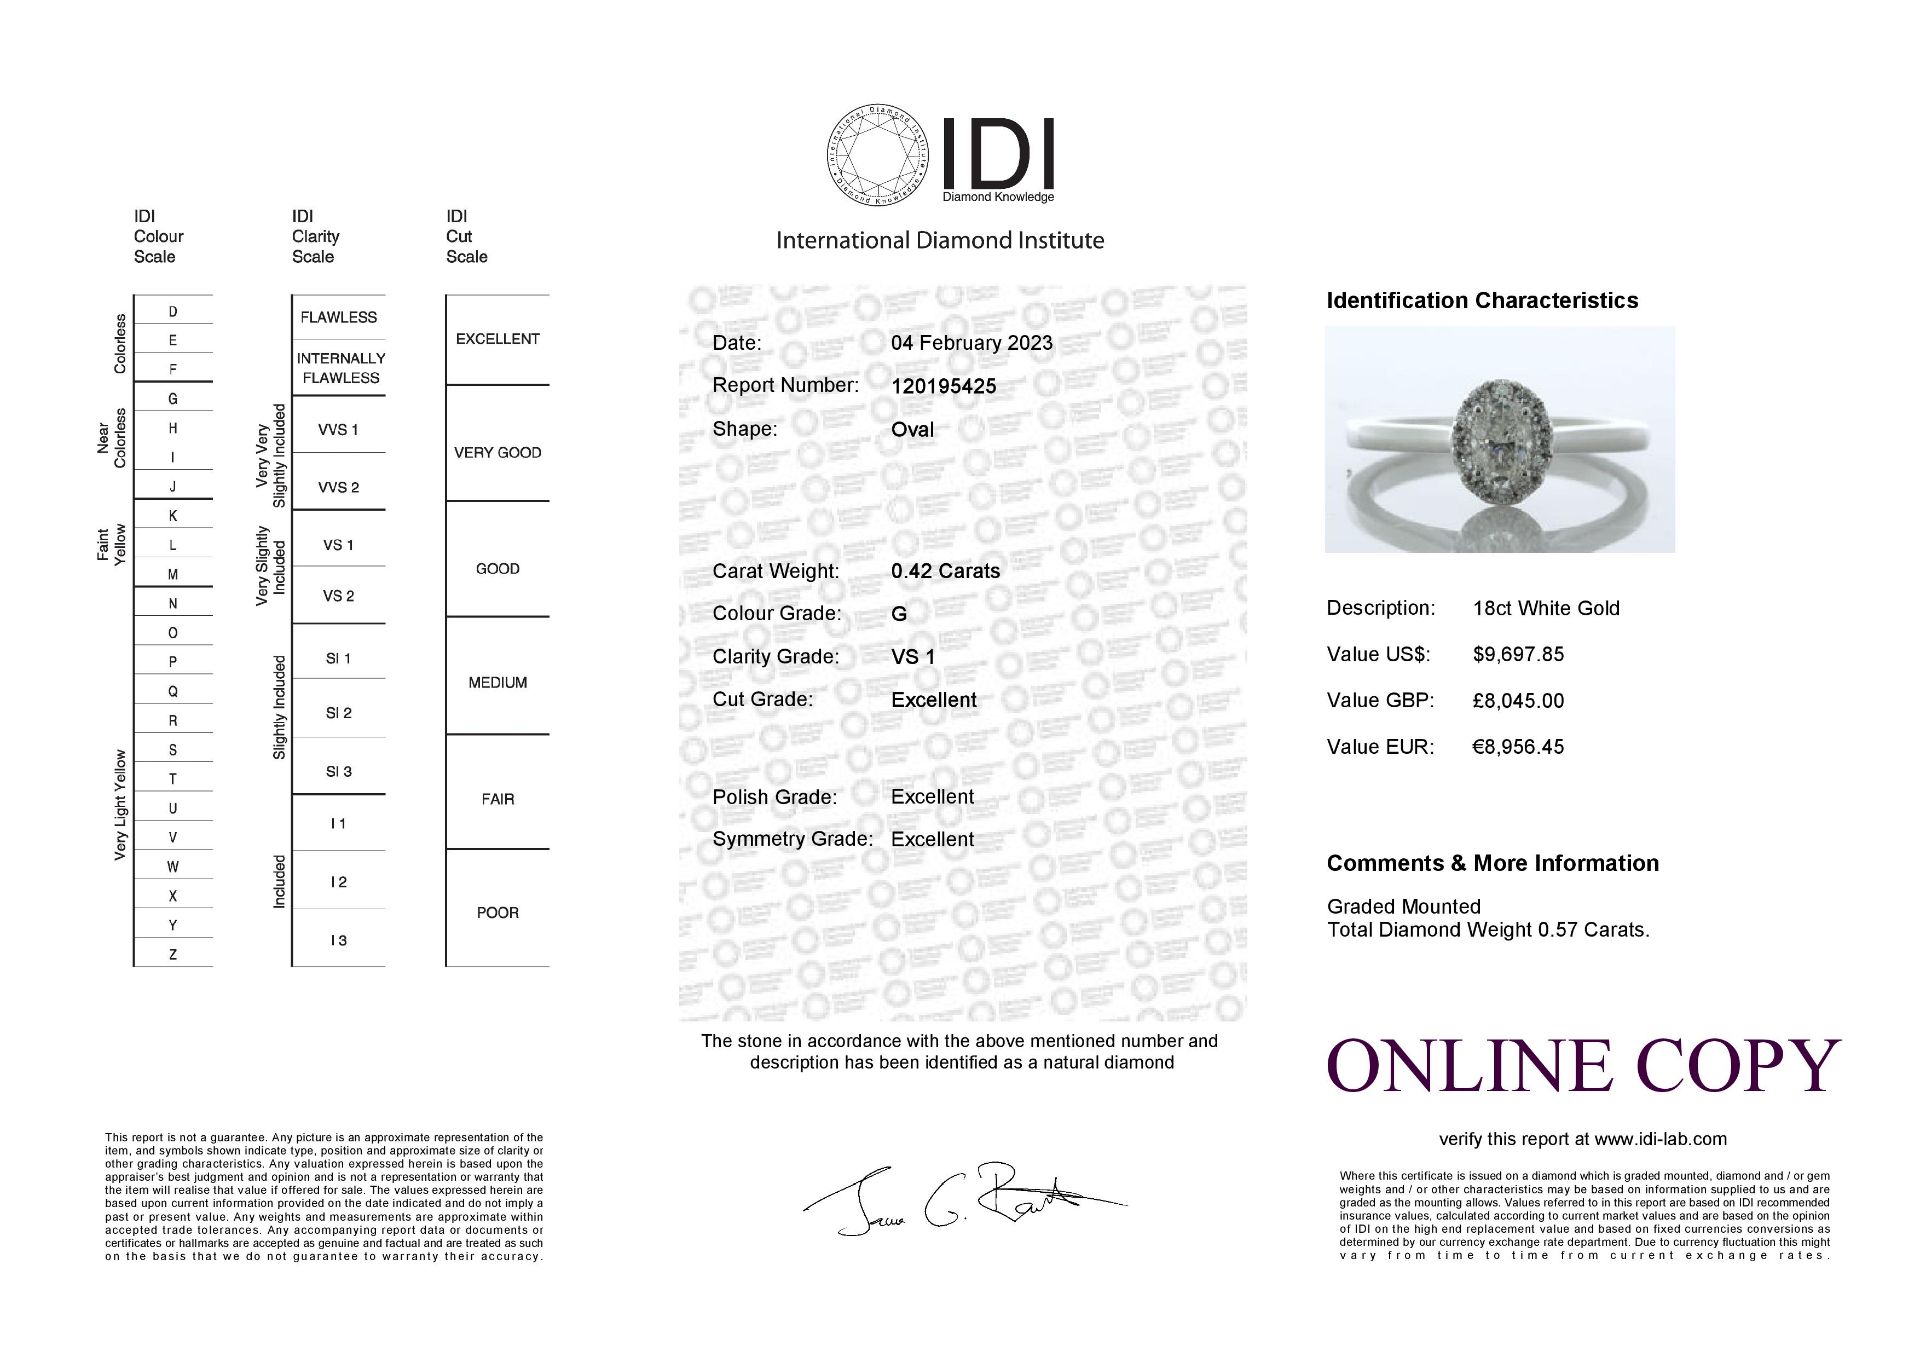 18ct White Gold Oval Cut Halo Diamond Ring (0.42) 0.57 Carats - Valued By IDI £8,045.00 - A gorgeous - Image 5 of 5